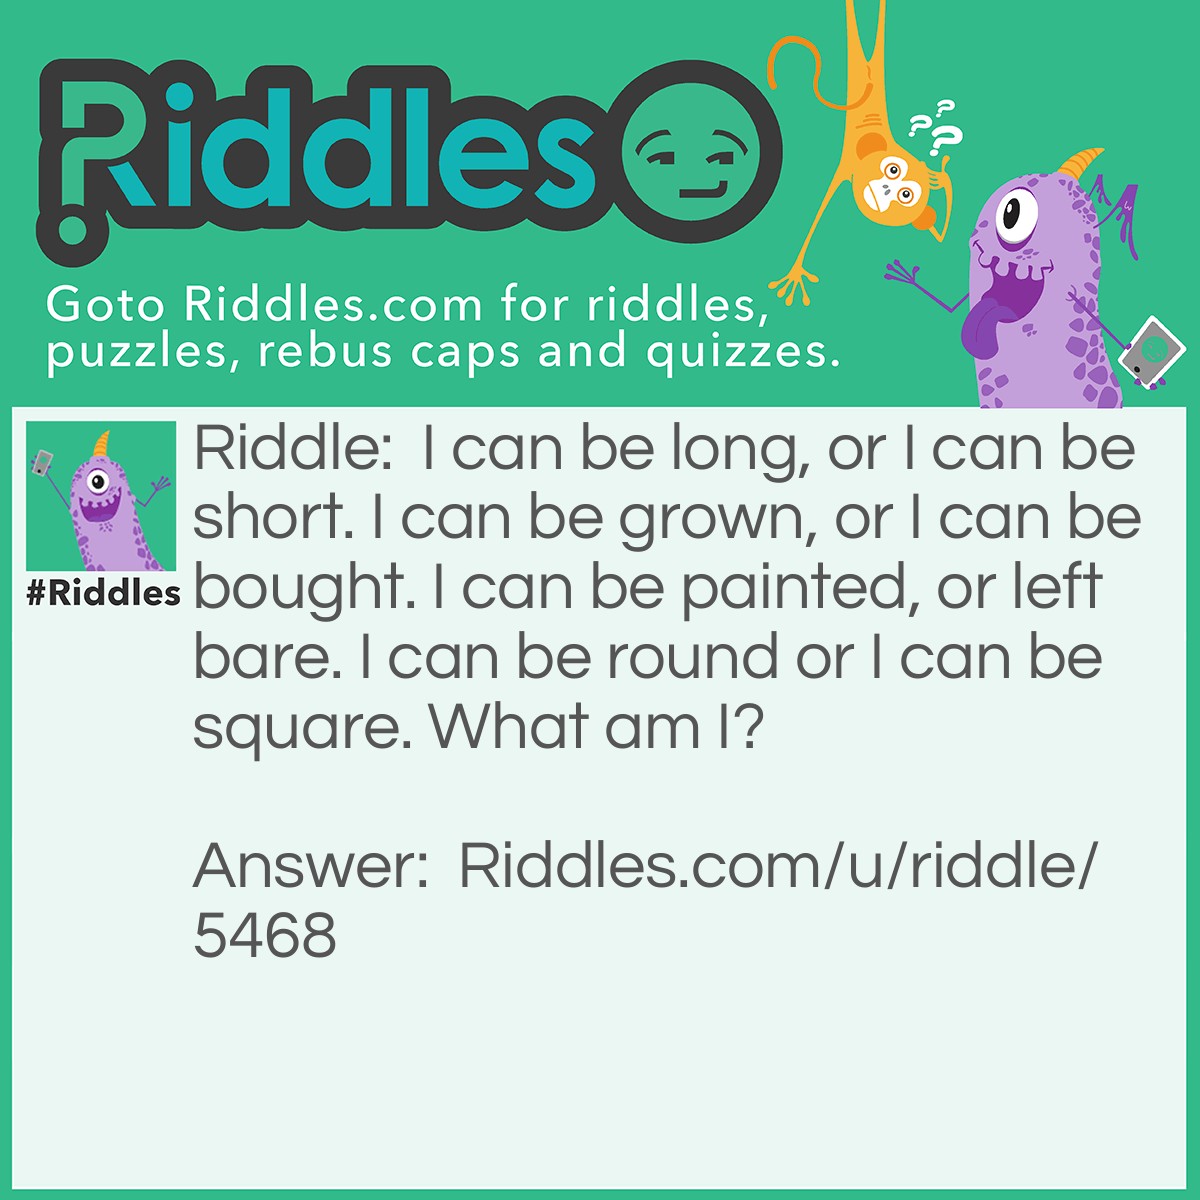 Riddle: I can be long, or I can be short. I can be grown, or I can be bought. I can be painted, or left bare. I can be round or I can be square. What am I? Answer: Fingernails.